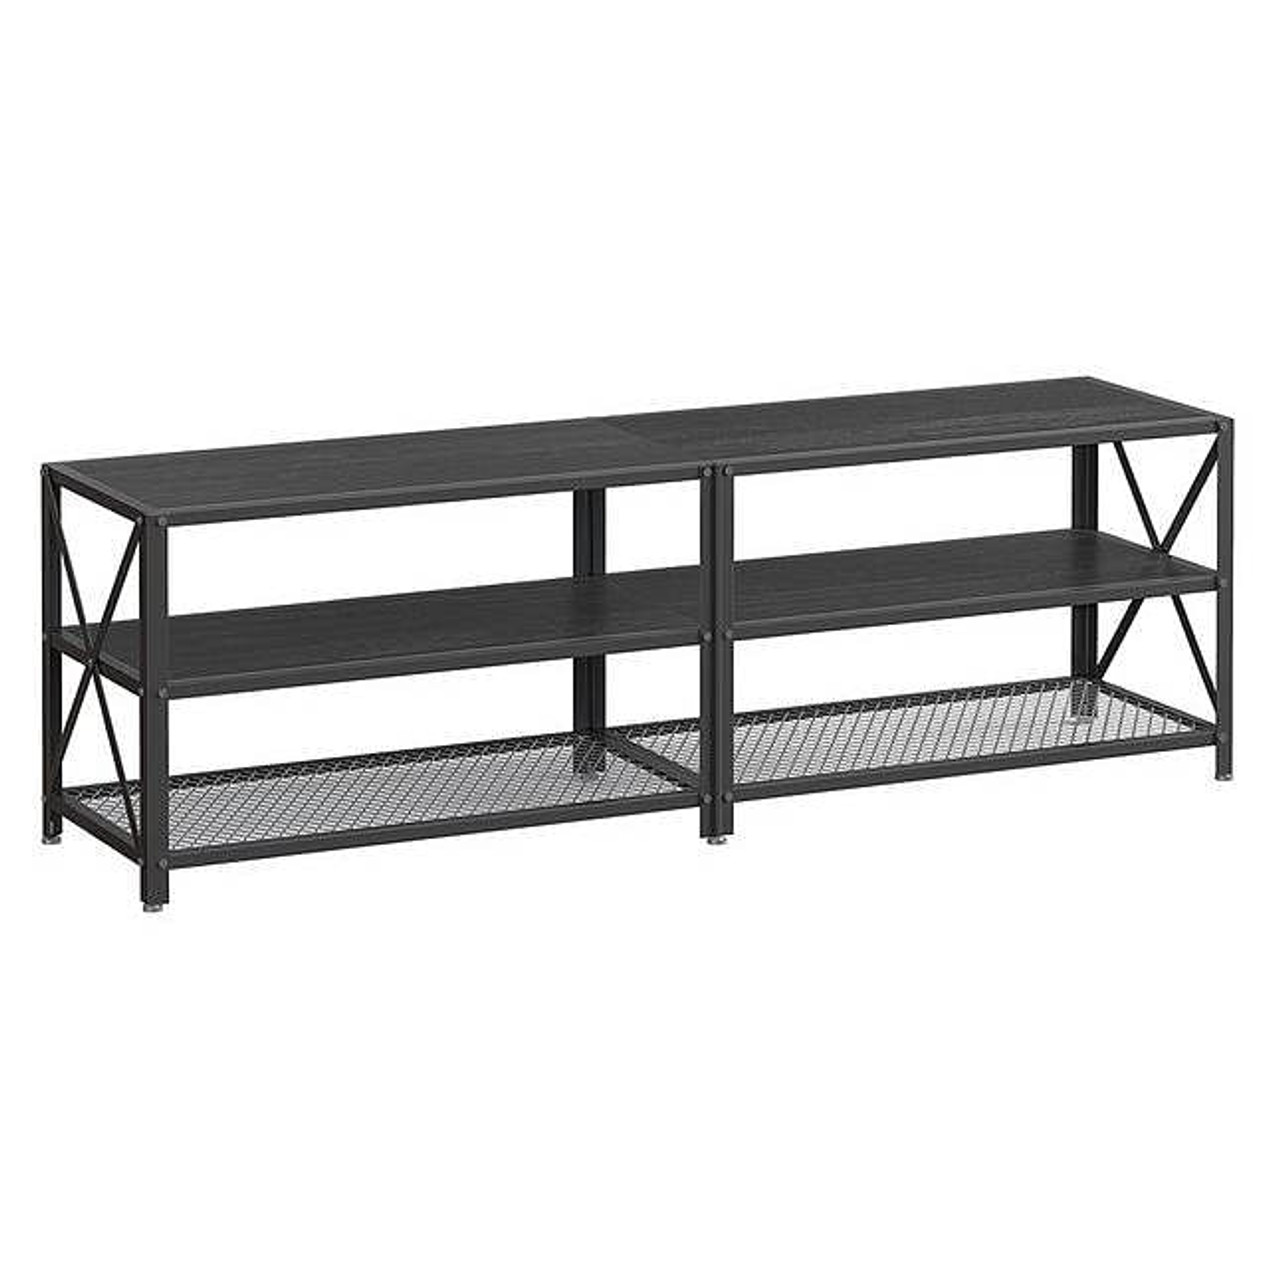 Industrial Black Metal Wood TV Stand Entertainment Center for TV up to 70-inch